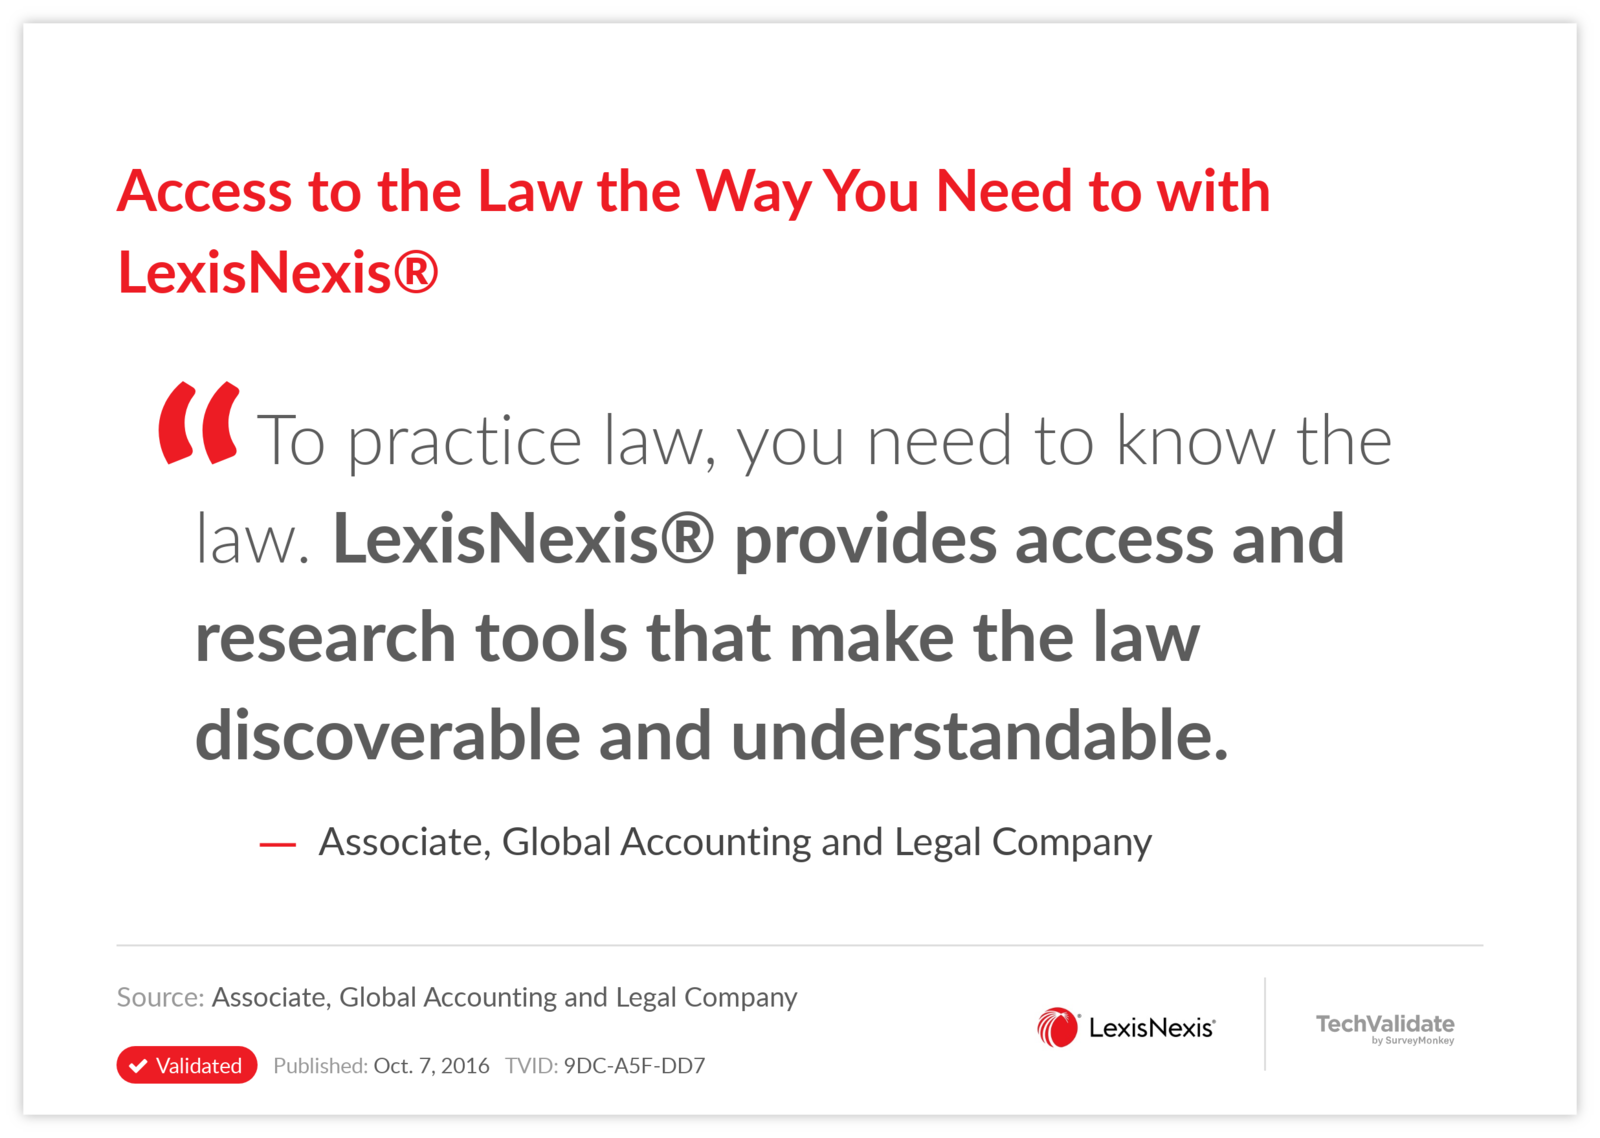 Access to the Law the Way You Need to with LexisNexis®